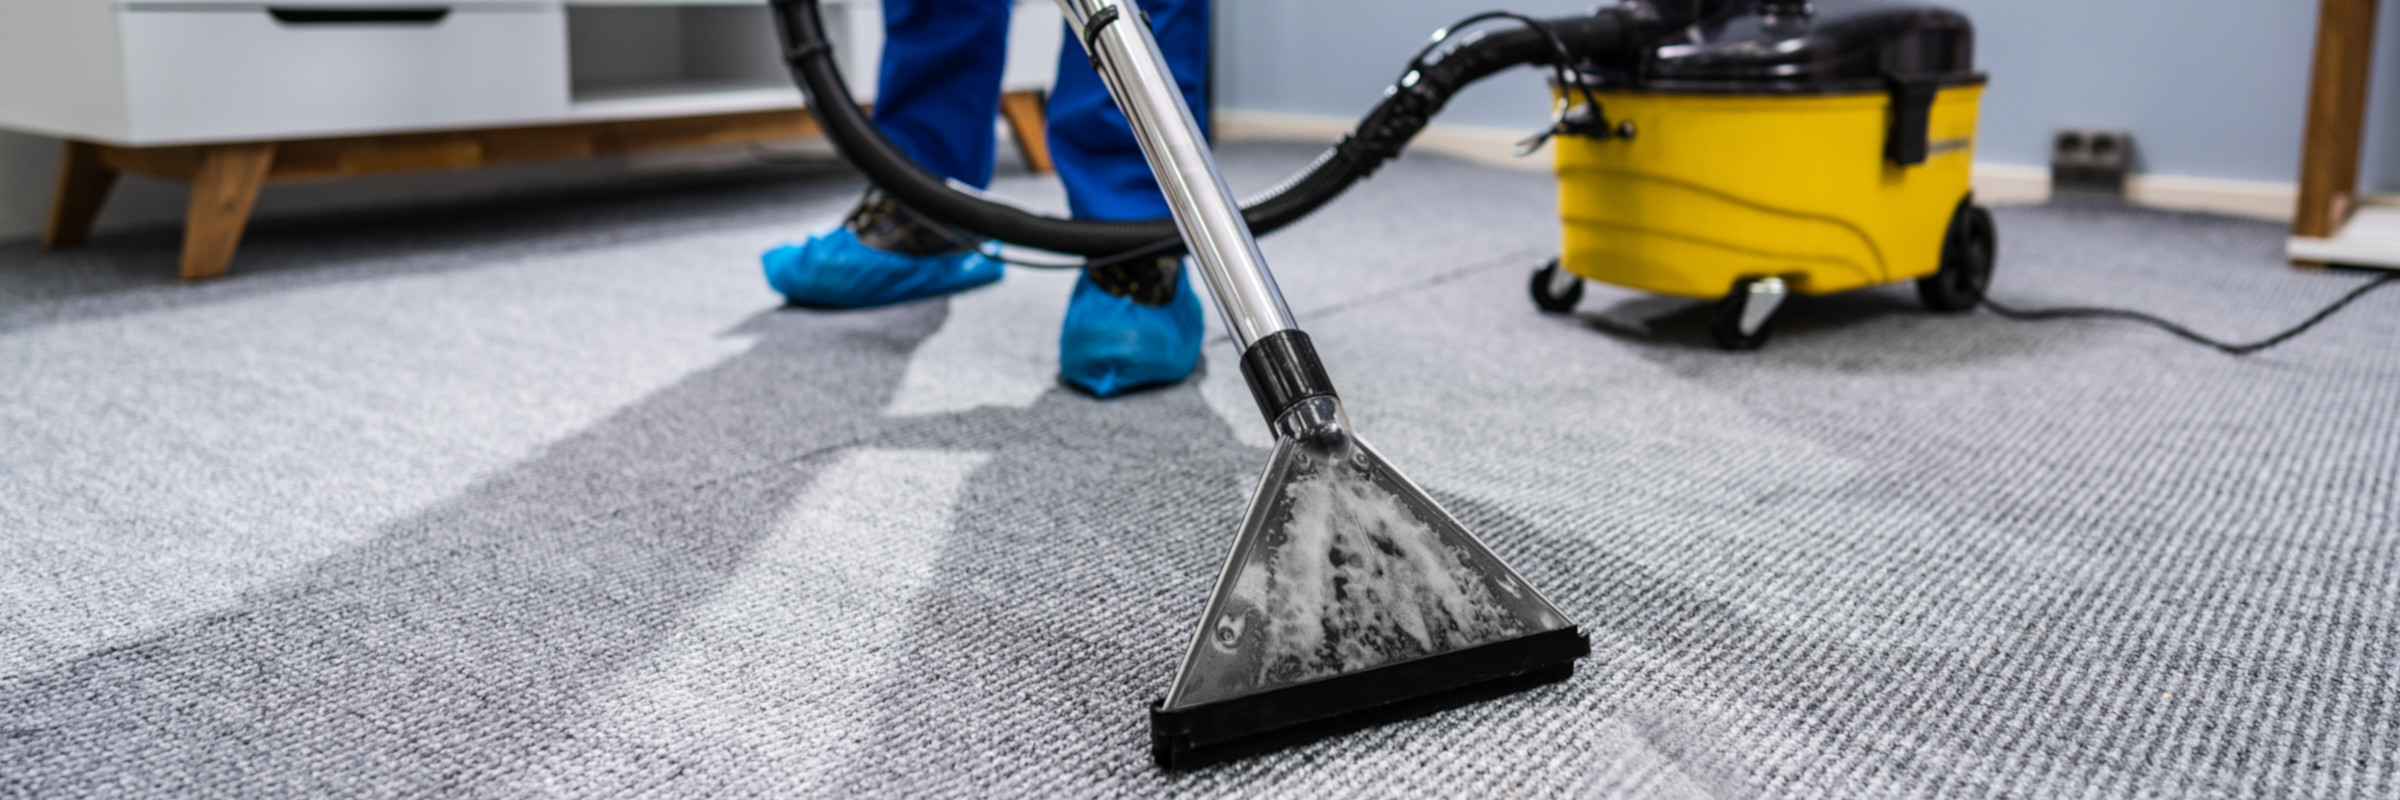 Upholstery and carpet cleaning machine